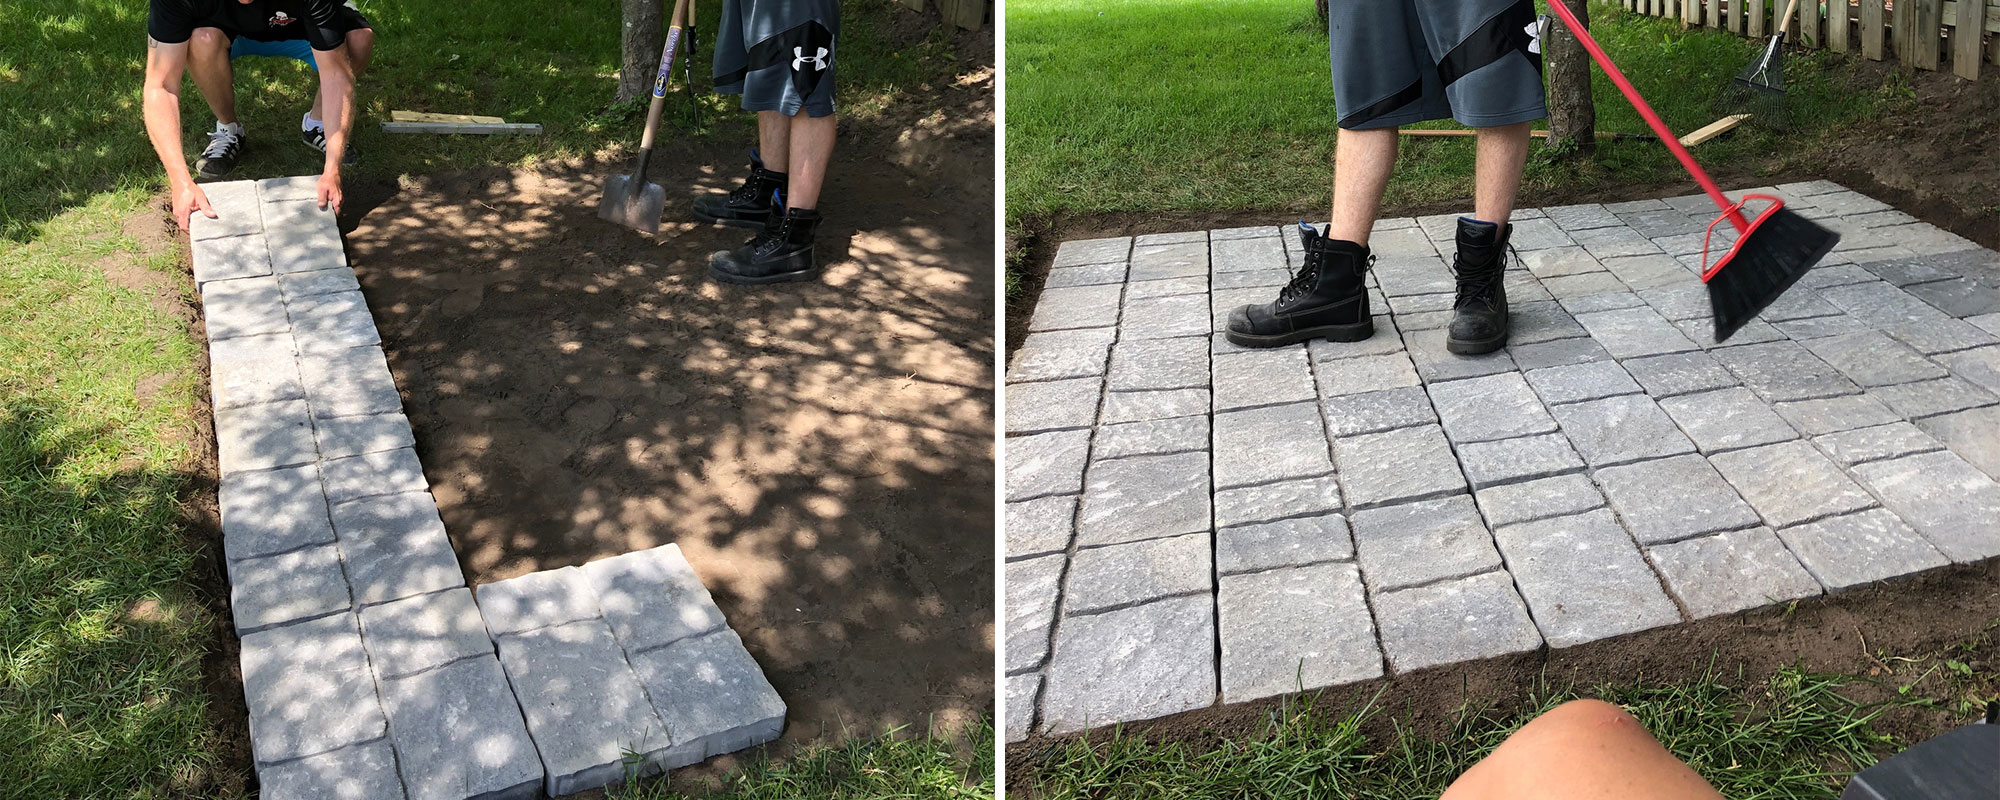 Image left: Positioning the patio stones on which the bar will sit. Image right: Sweeping completed patio area for bar.